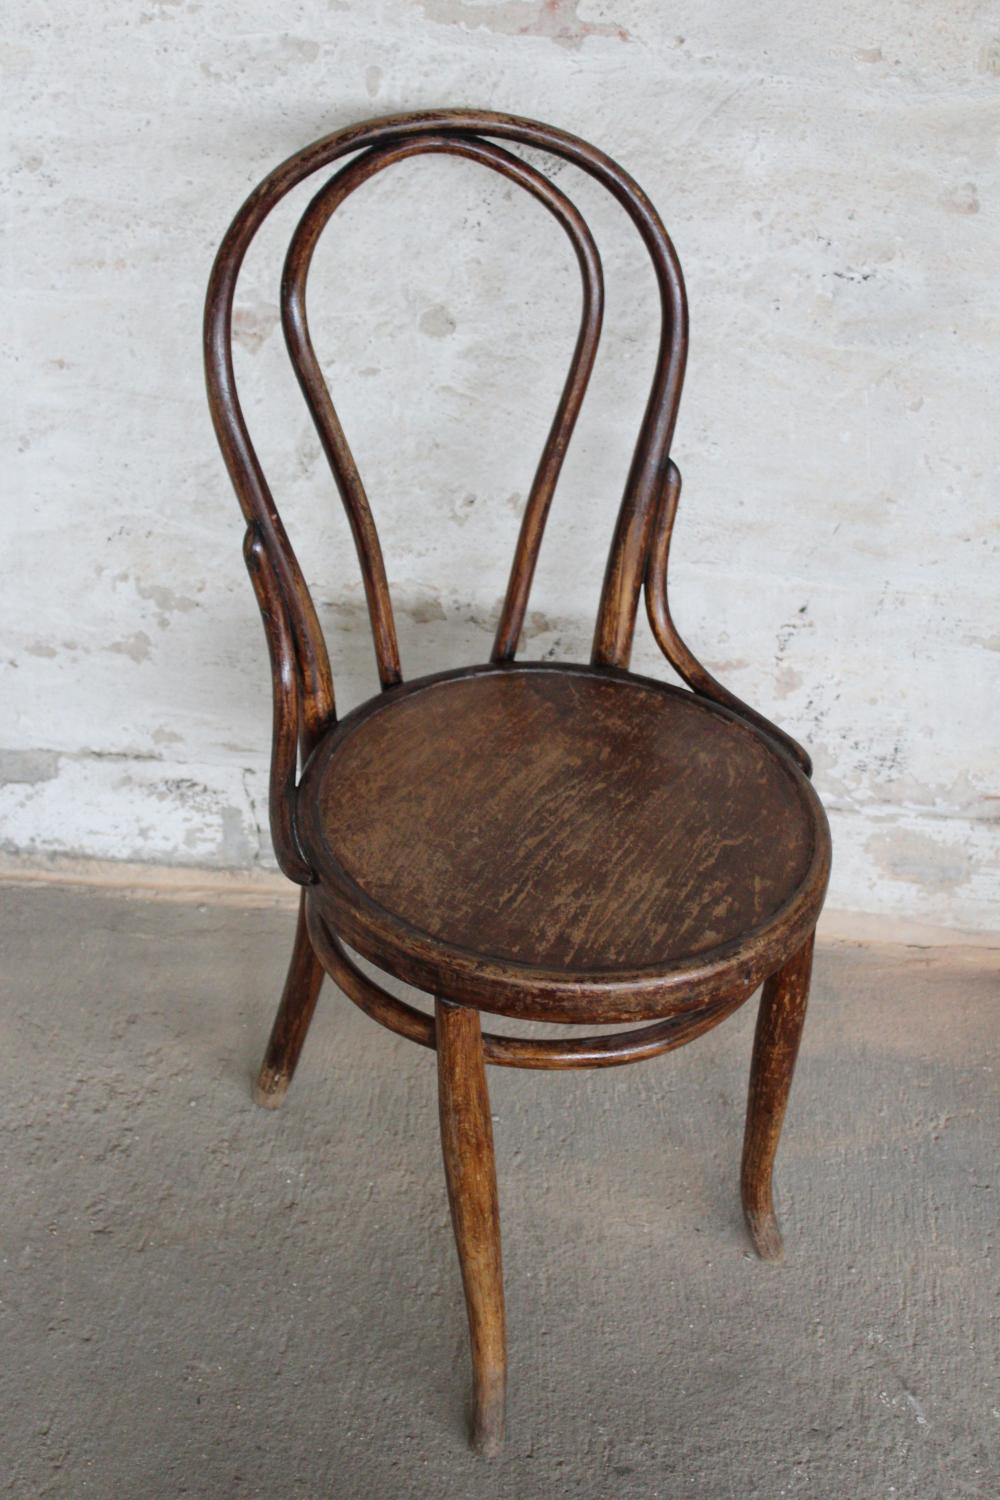 Classic wooden chair